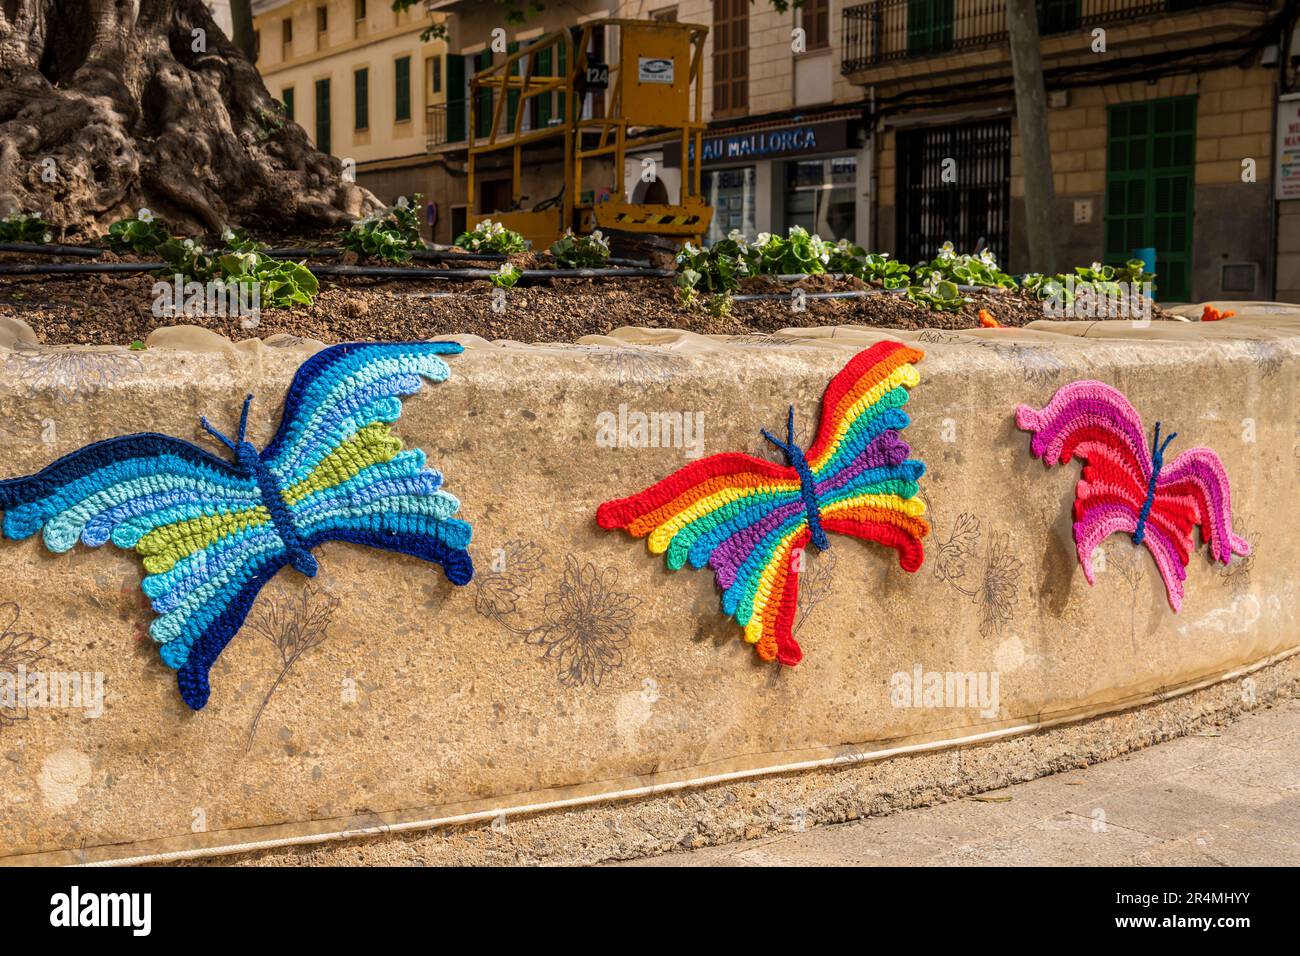 Close-up of colorful butterflies made of fabric decorating the street.  Manacor, island of Mallorca, Spain Stock Photo - Alamy